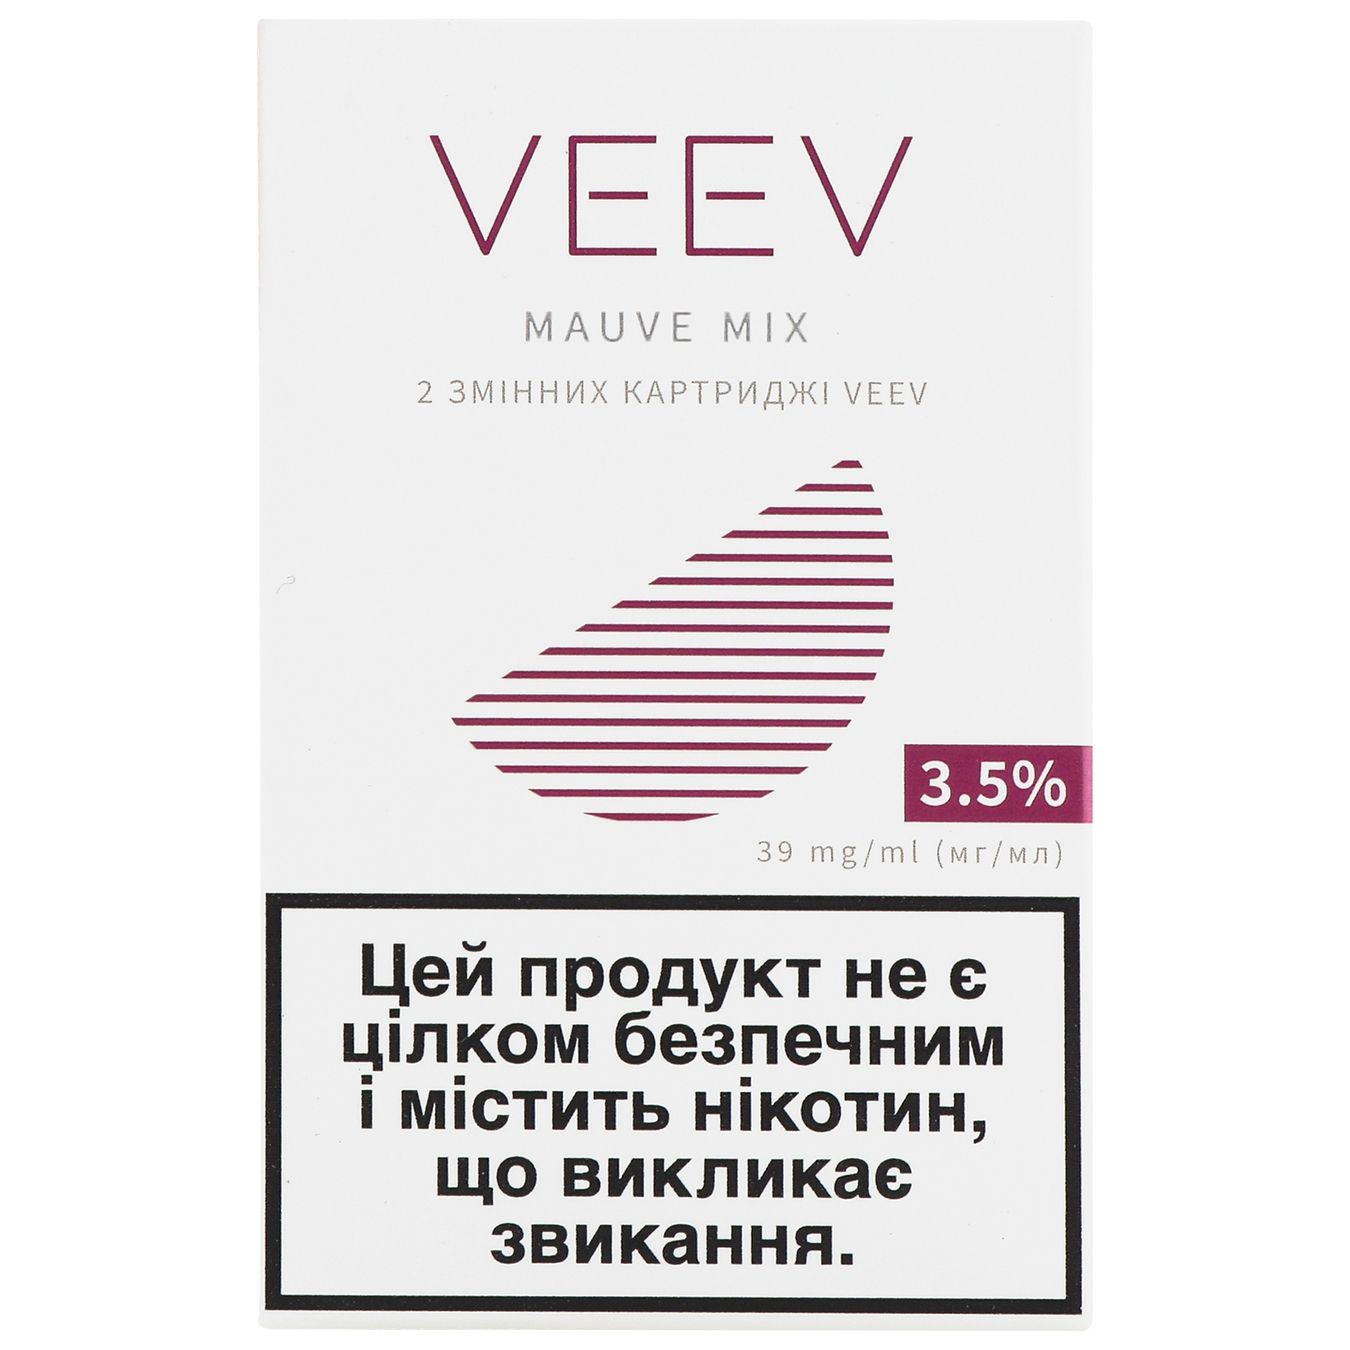 Replaceable cartridge Veev Mauve mix 3.5% (the price is without excise duty)